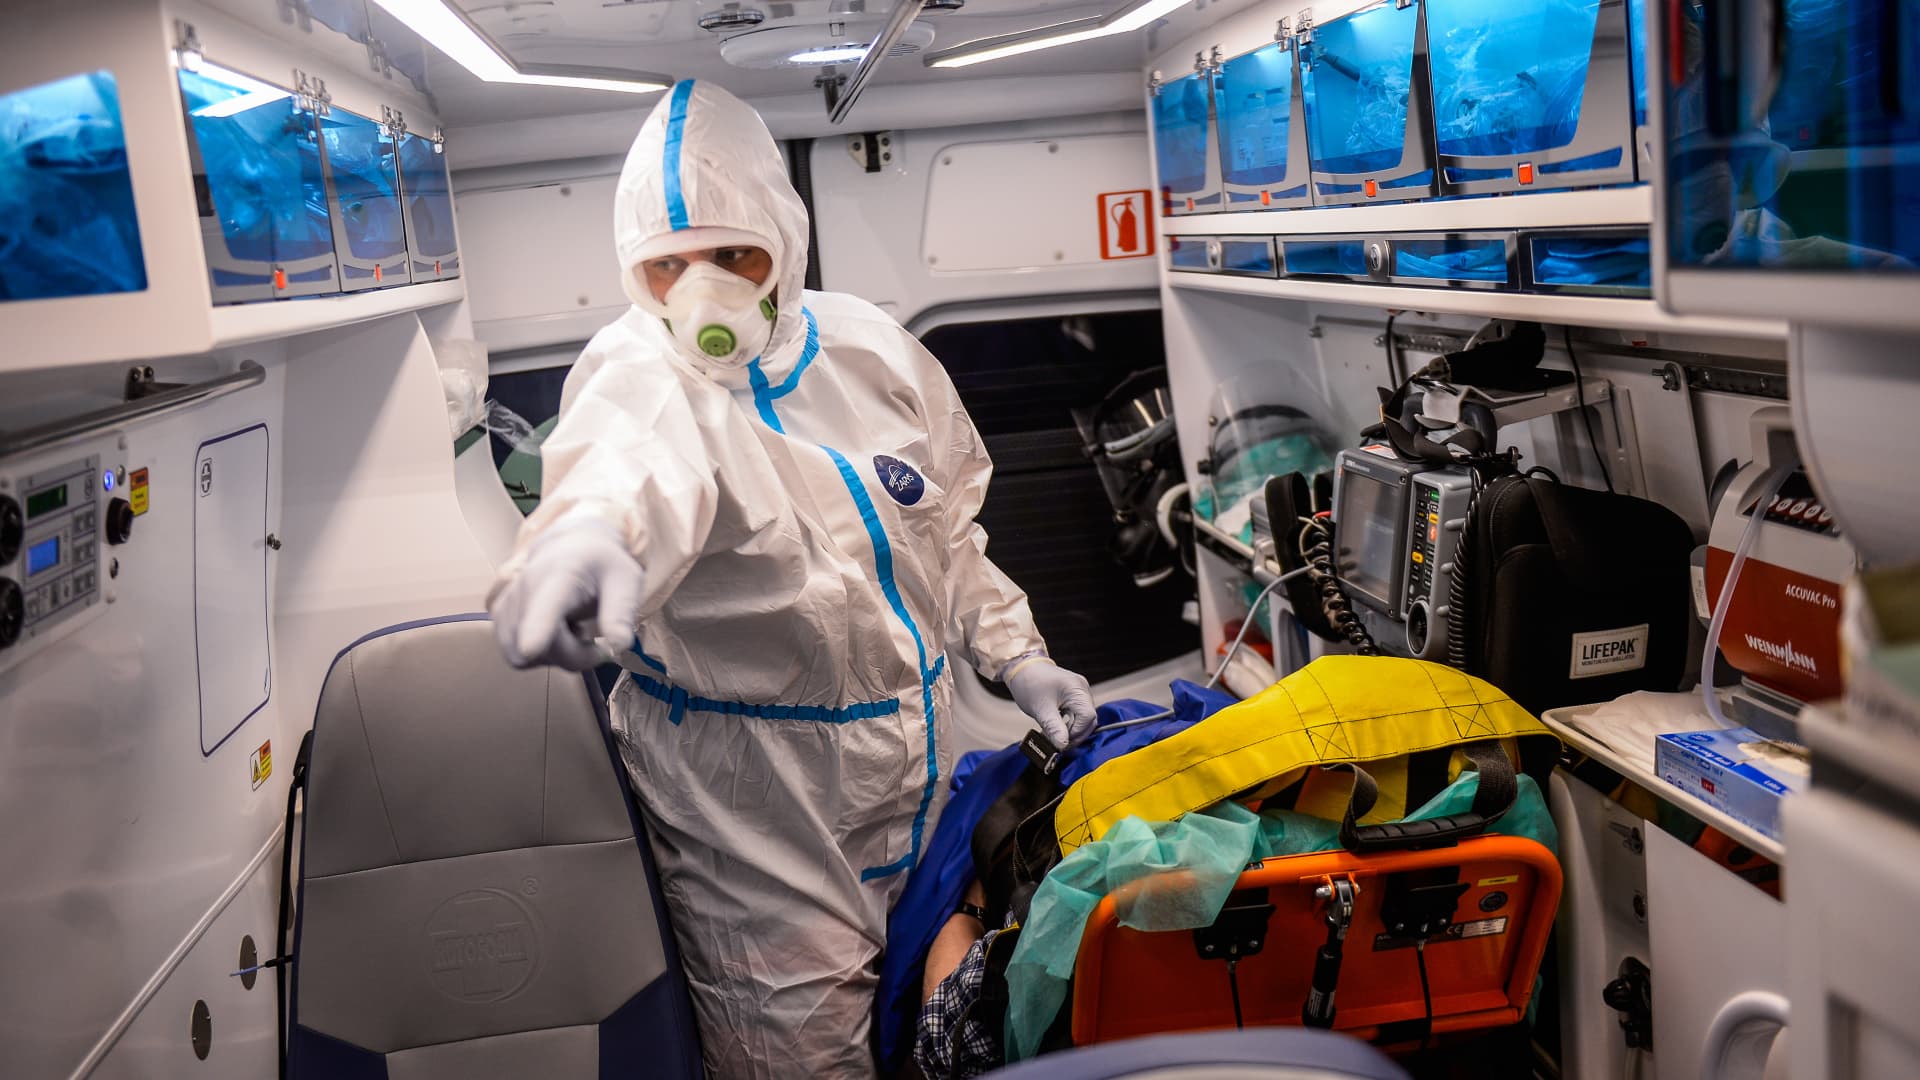 Bochnia Hospital paramedics wear protective equipment as they transport a patient suffering of COVID-19 to a local hospital on March 17, 2021 in Bochnia, Poland.